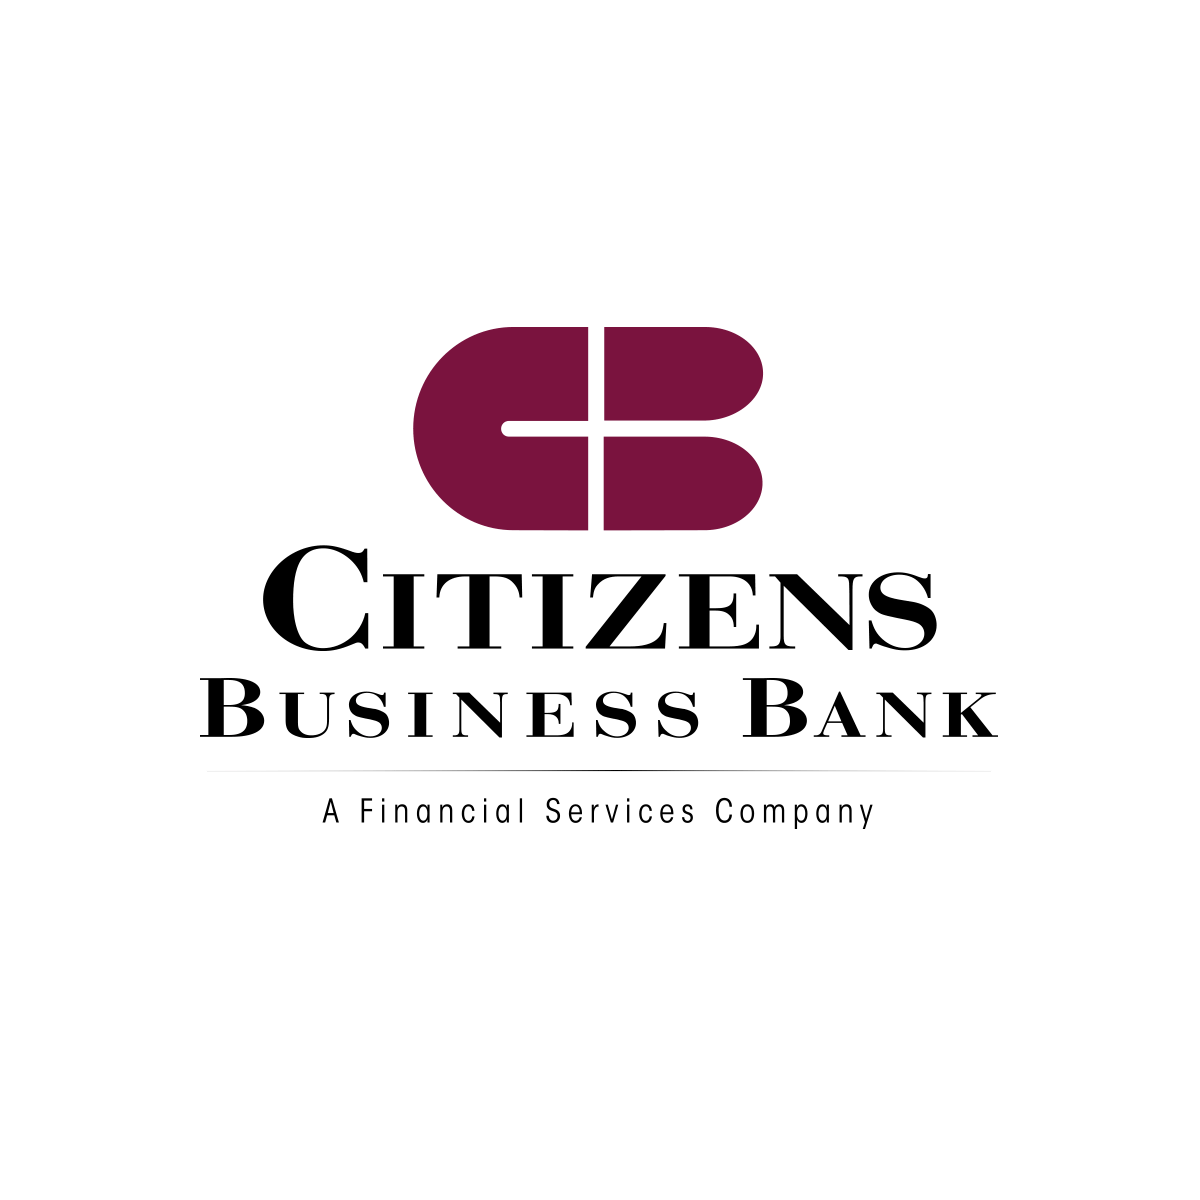 Citizens Business Bank finalizes acquisition of County Commerce Bank |  Pacific Coast Business Times